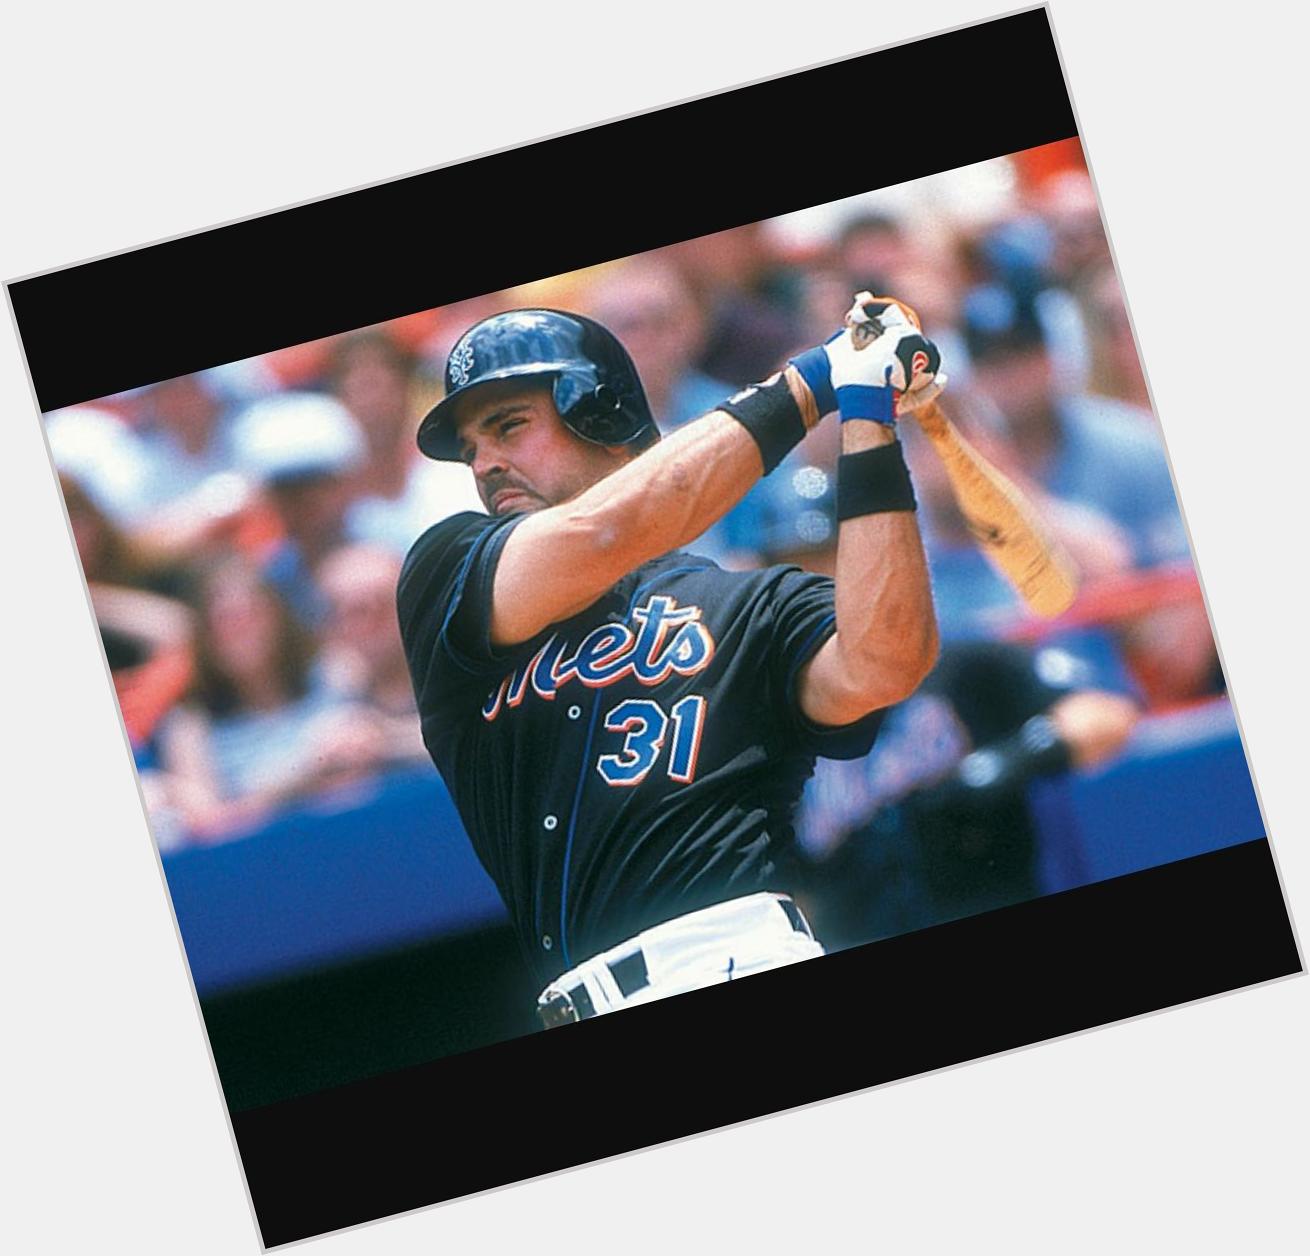 HAPPY BIRTHDAY TO THE BEST HITTING CATCHER OF ALL TIME THE PIZZA MAN SIR MIKE PIAZZA!!!! 